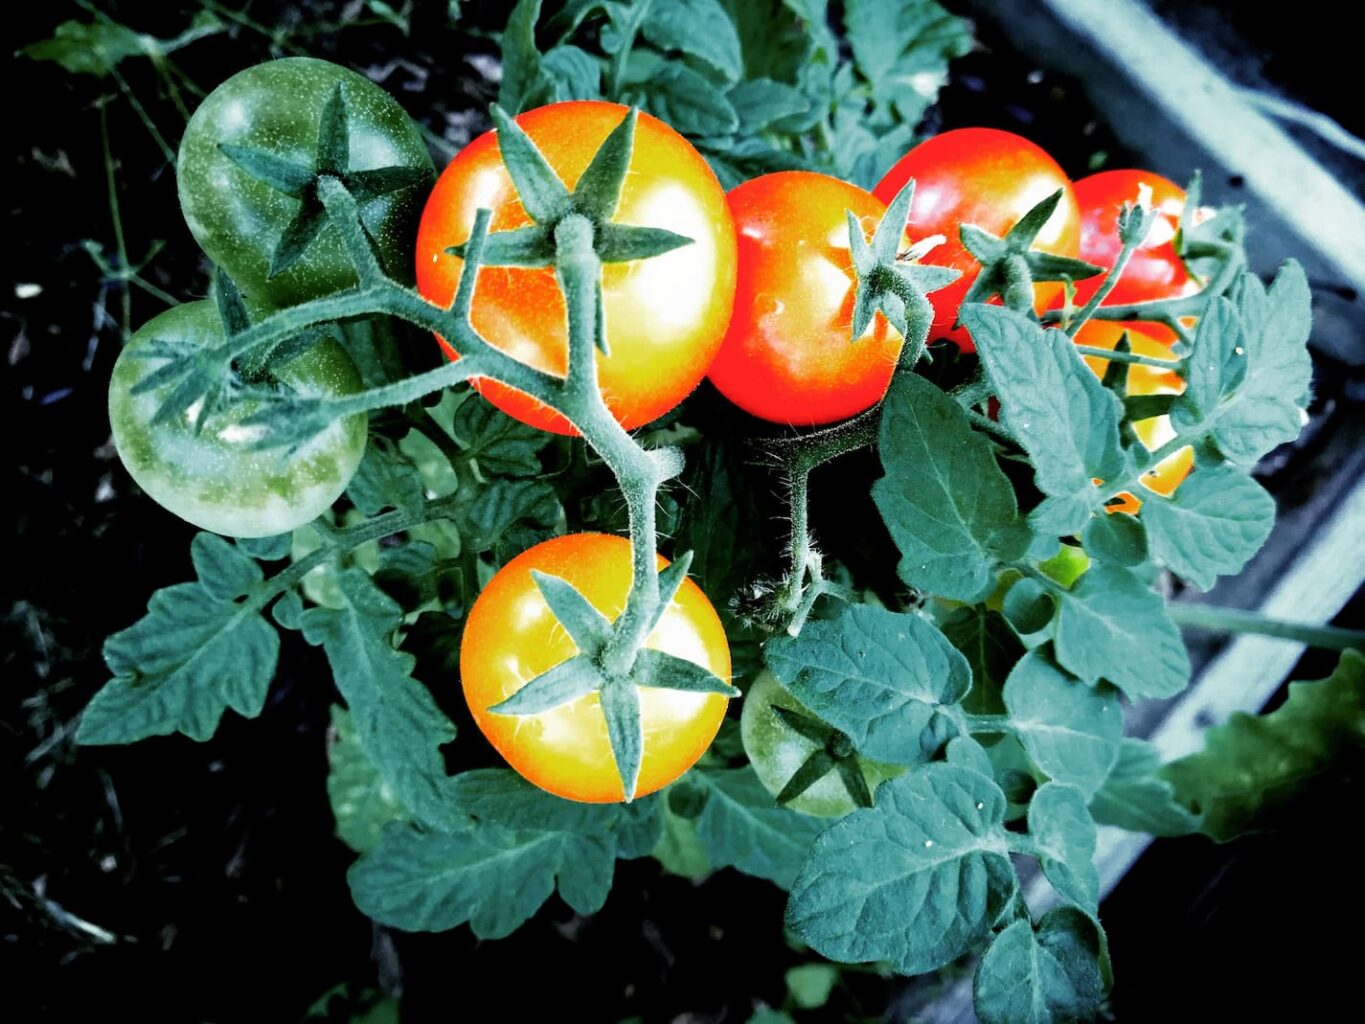 An image of fresh tomatoes growing in the ground.